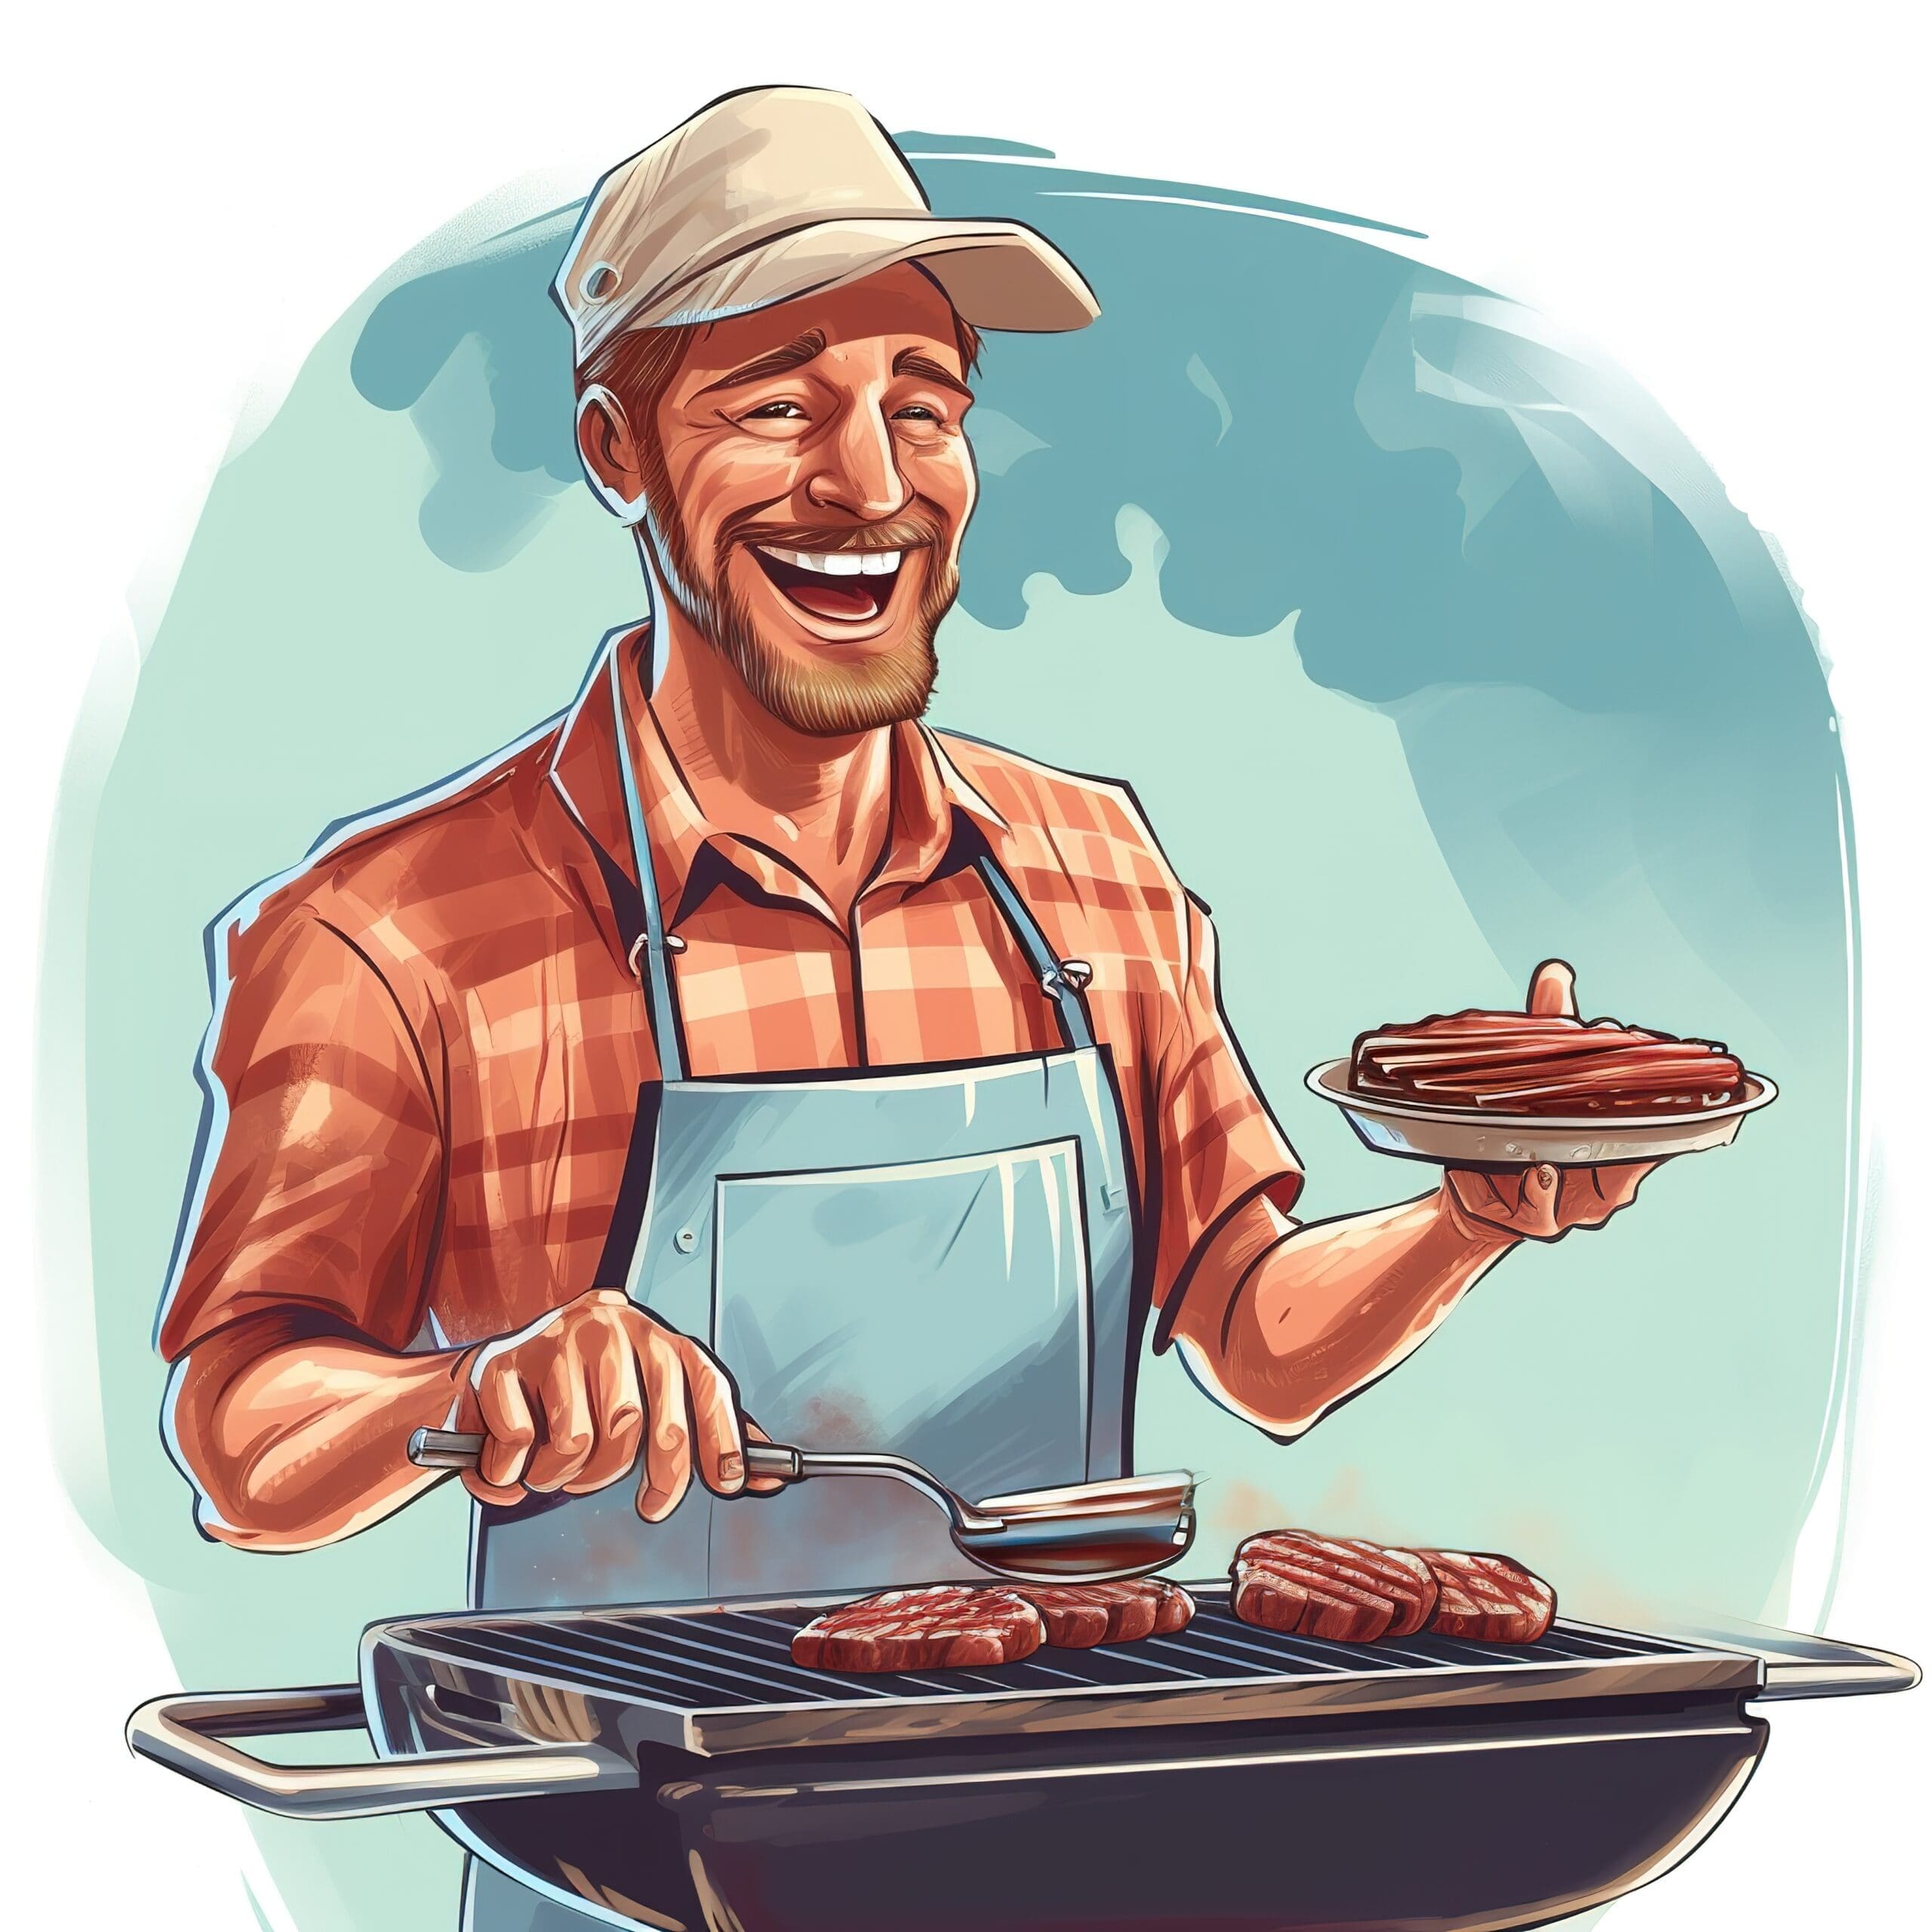 Cartoon graphic of a satisfied steak with a chef’s hat waving goodbye on a colorful background.